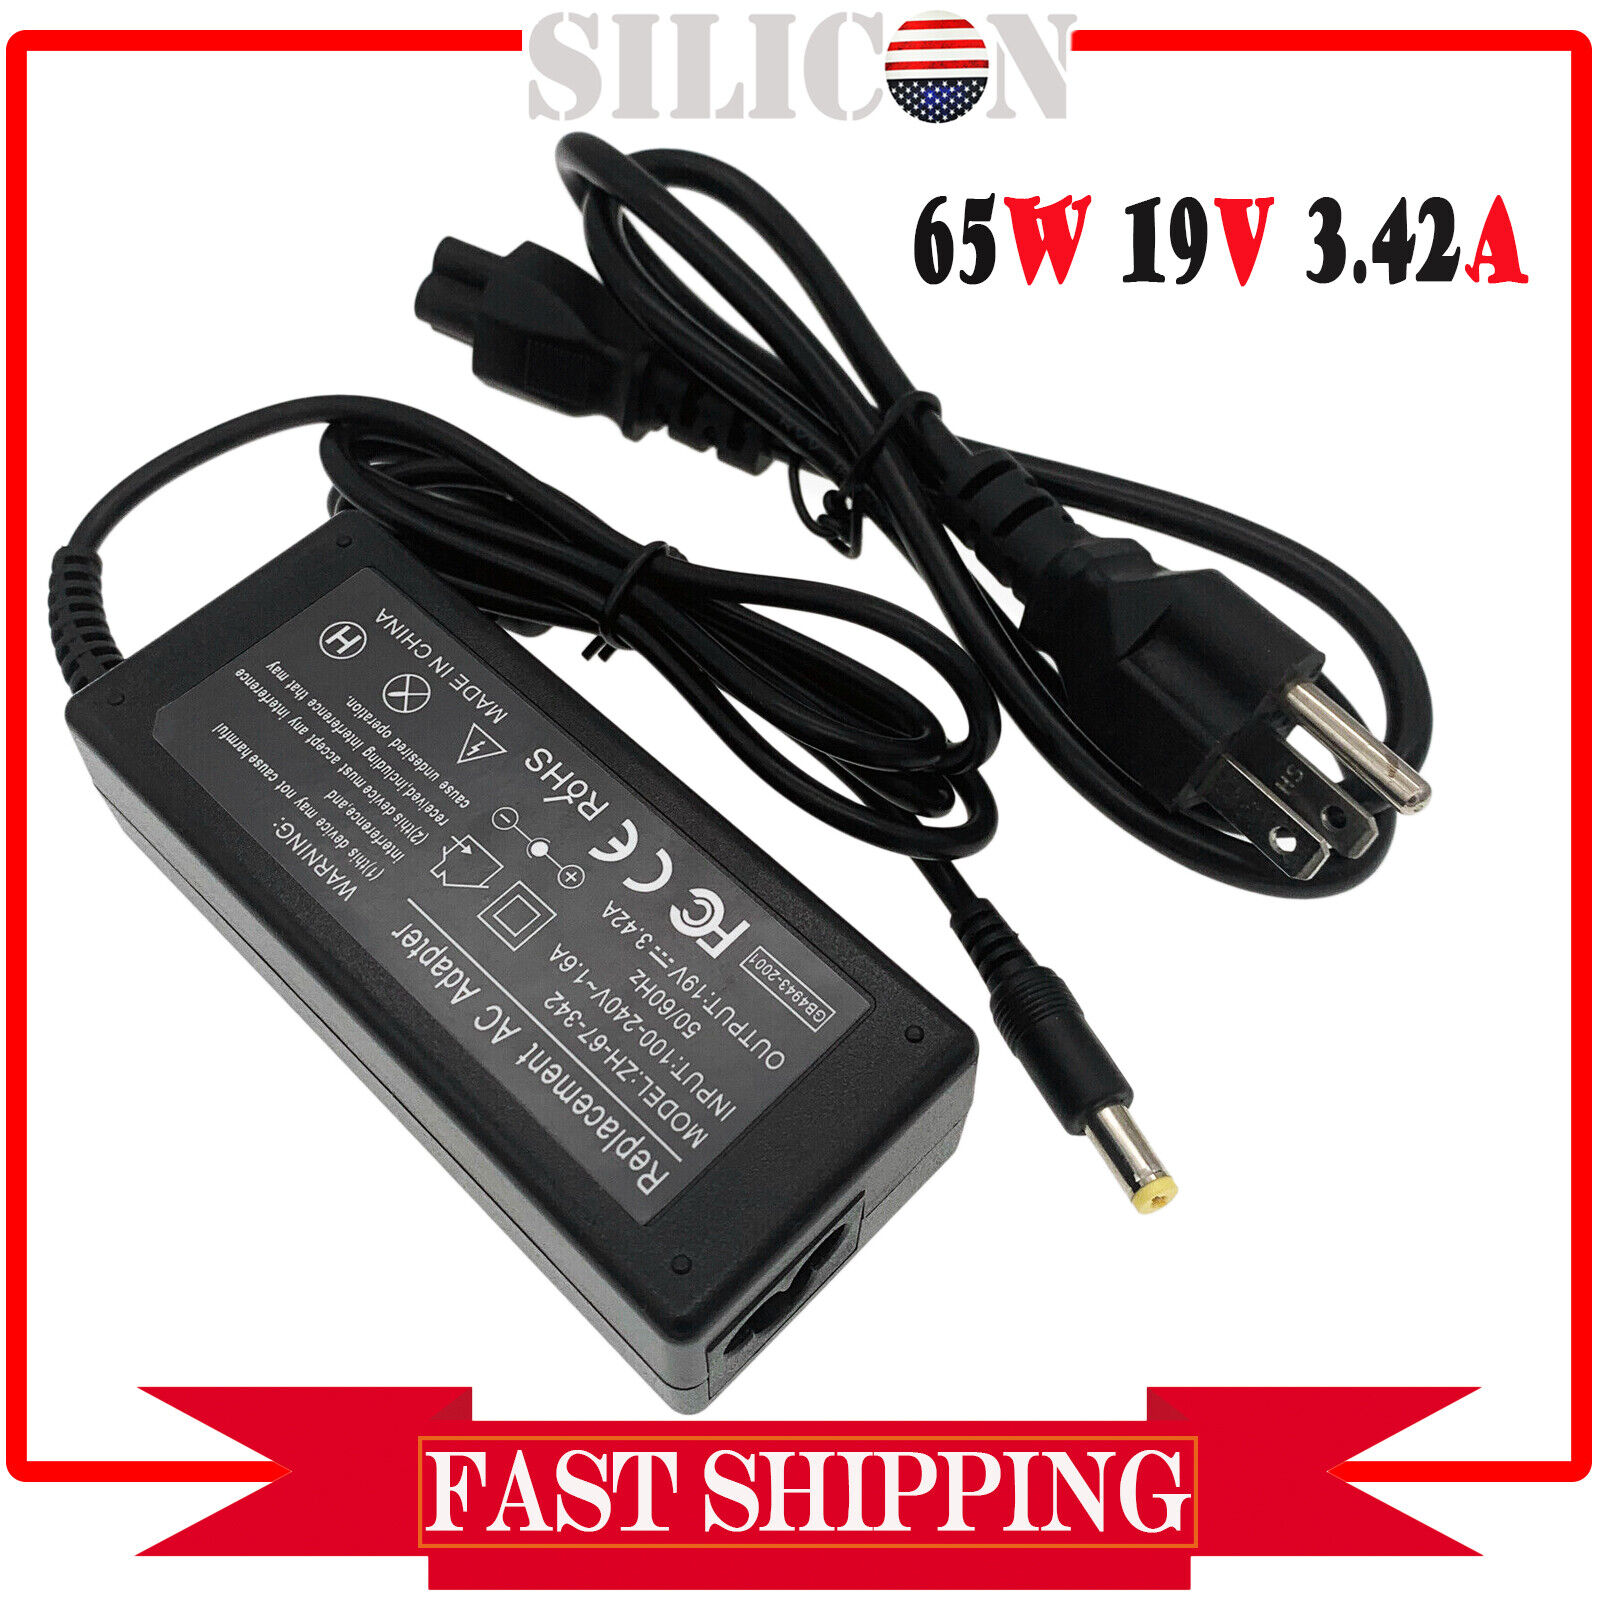 New AC Adapter For Gateway MS2274 MS2285 NV5214U Laptop Charger Power Cord